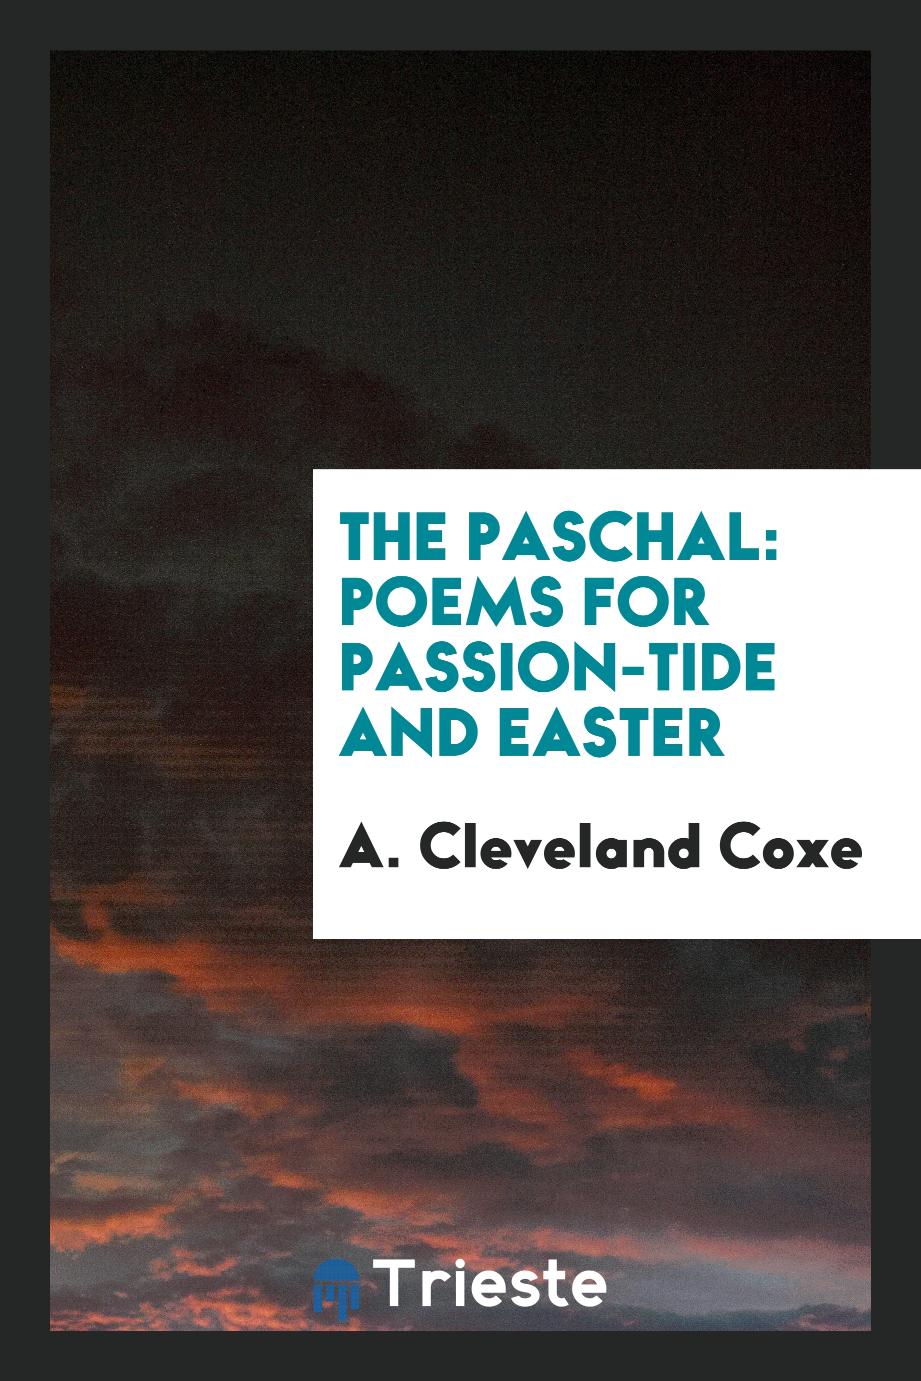 The Paschal: poems for Passion-tide and Easter